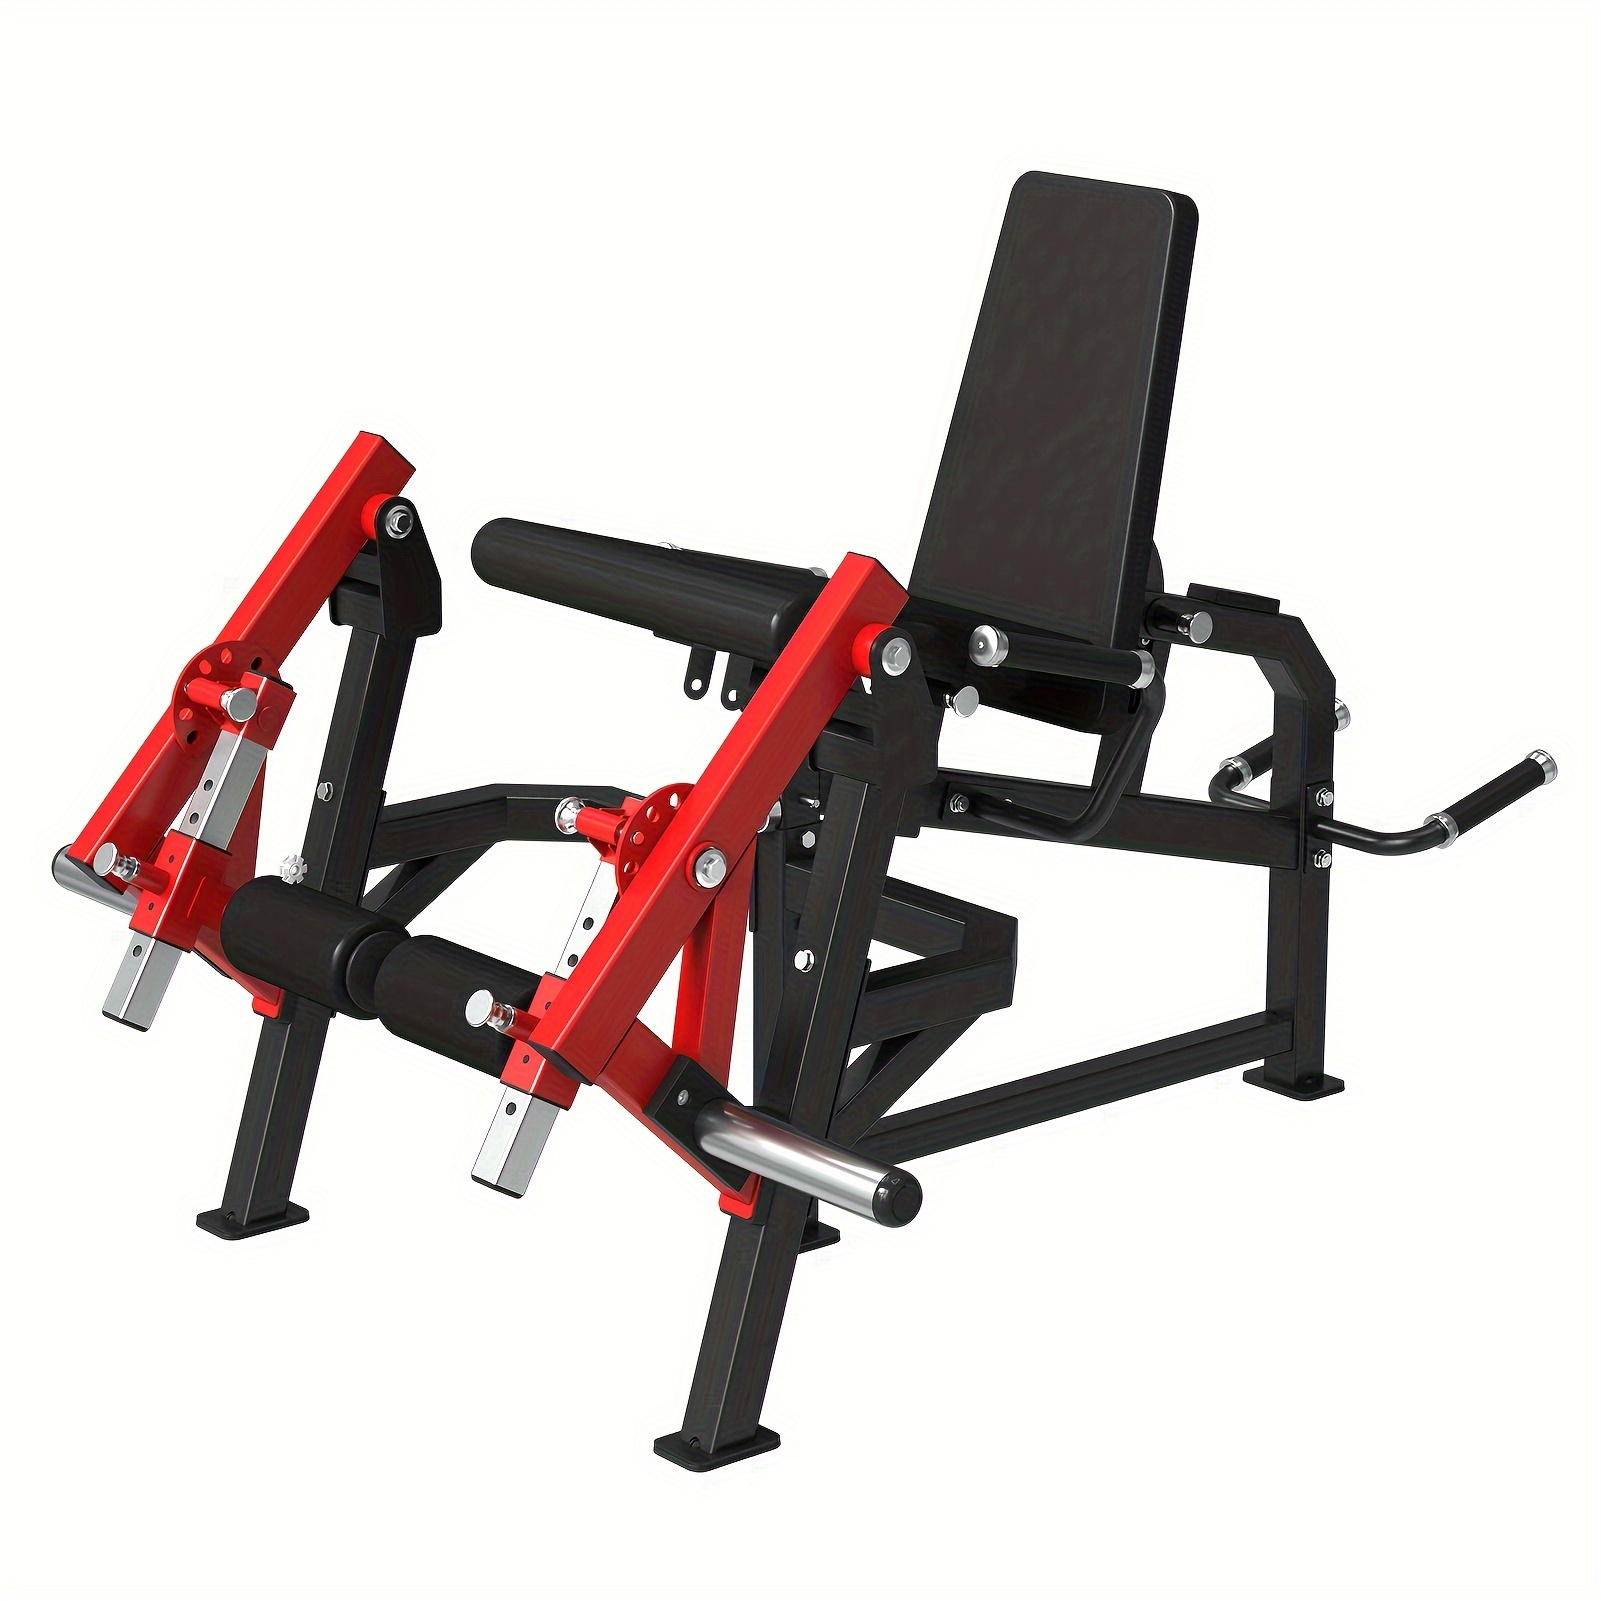 

1pc Leg Extension And Machine, Adjustable Leg Exerciser, Suitable For Bench Press, Fitness Training, Body Shaping